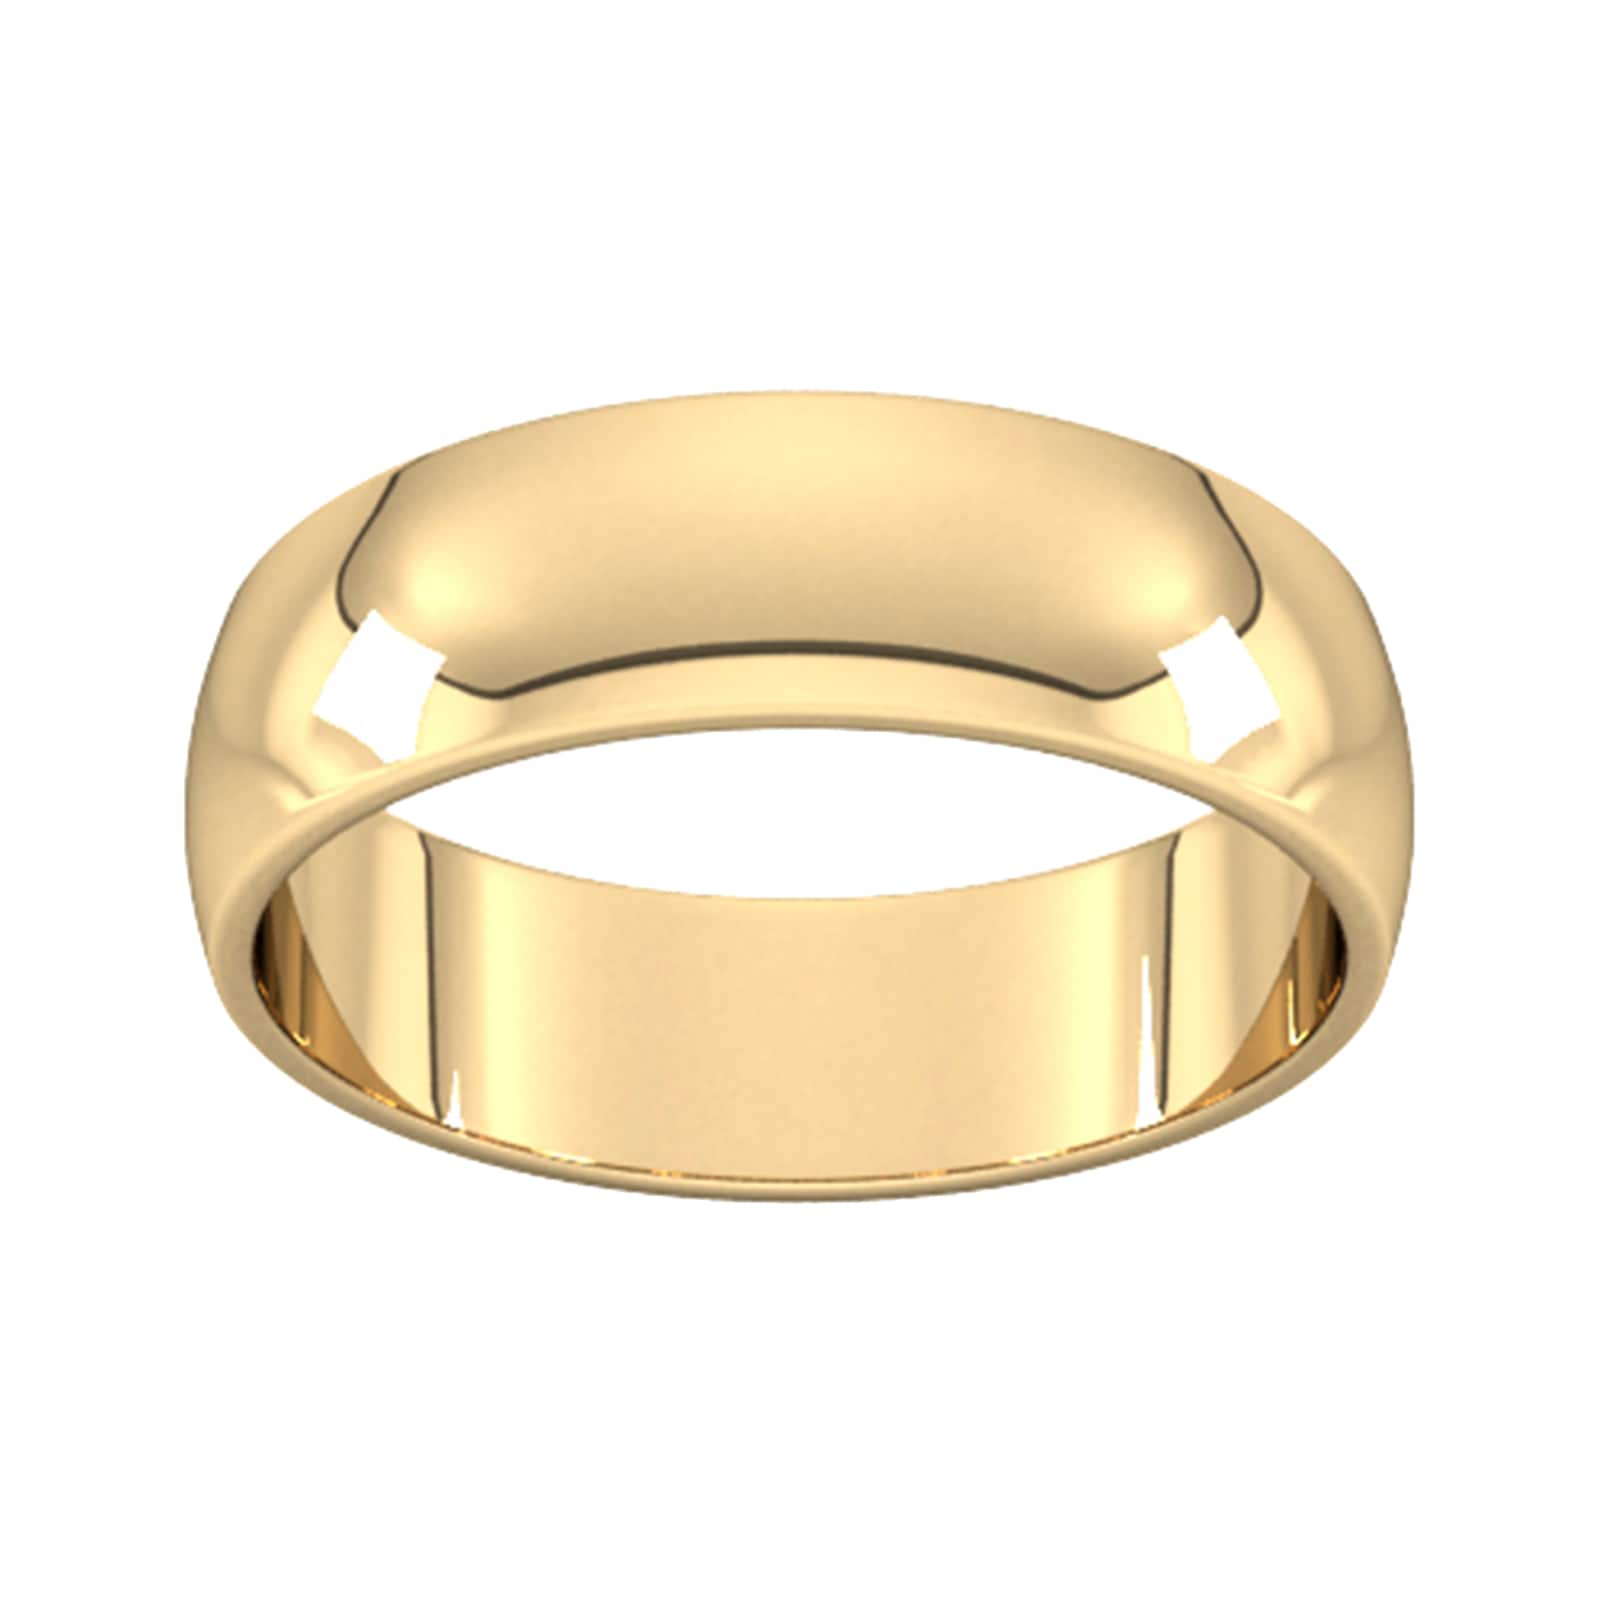 6mm D Shape Standard Wedding Ring In 18 Carat Yellow Gold - Ring Size M